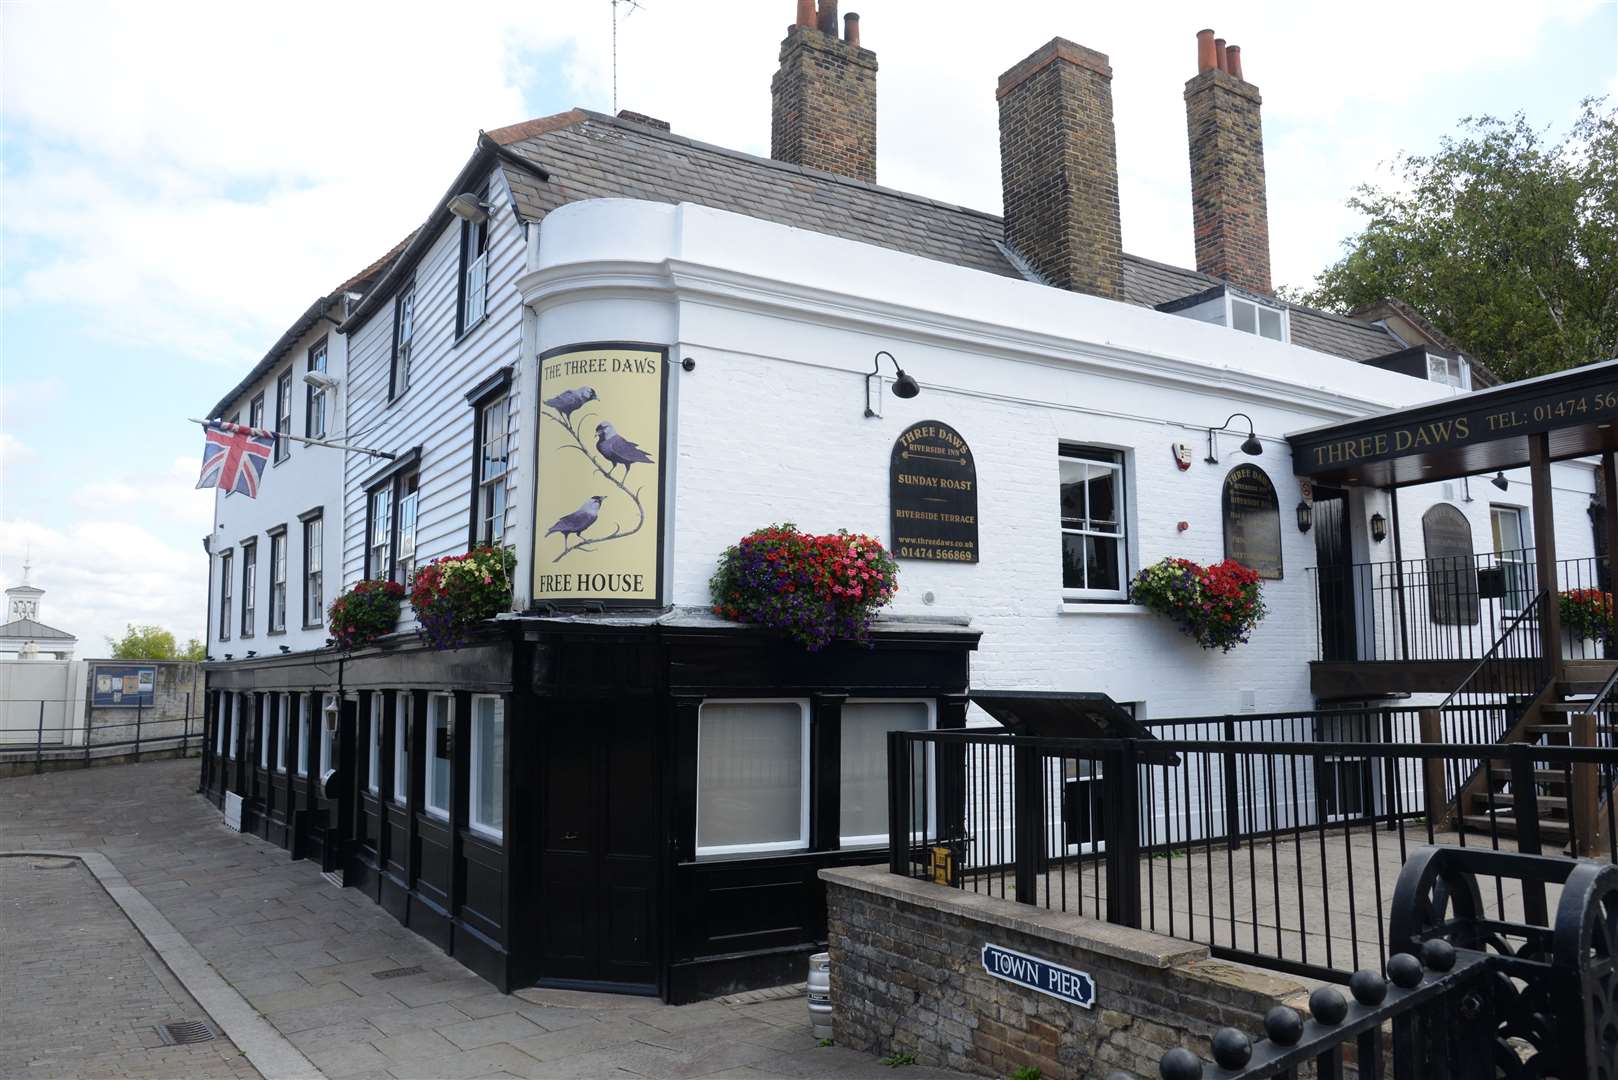 The Three Daws in Gravesend was recently recognised by the Daily Mail for its tasty Sunday roasts. Picture: Chris Davey